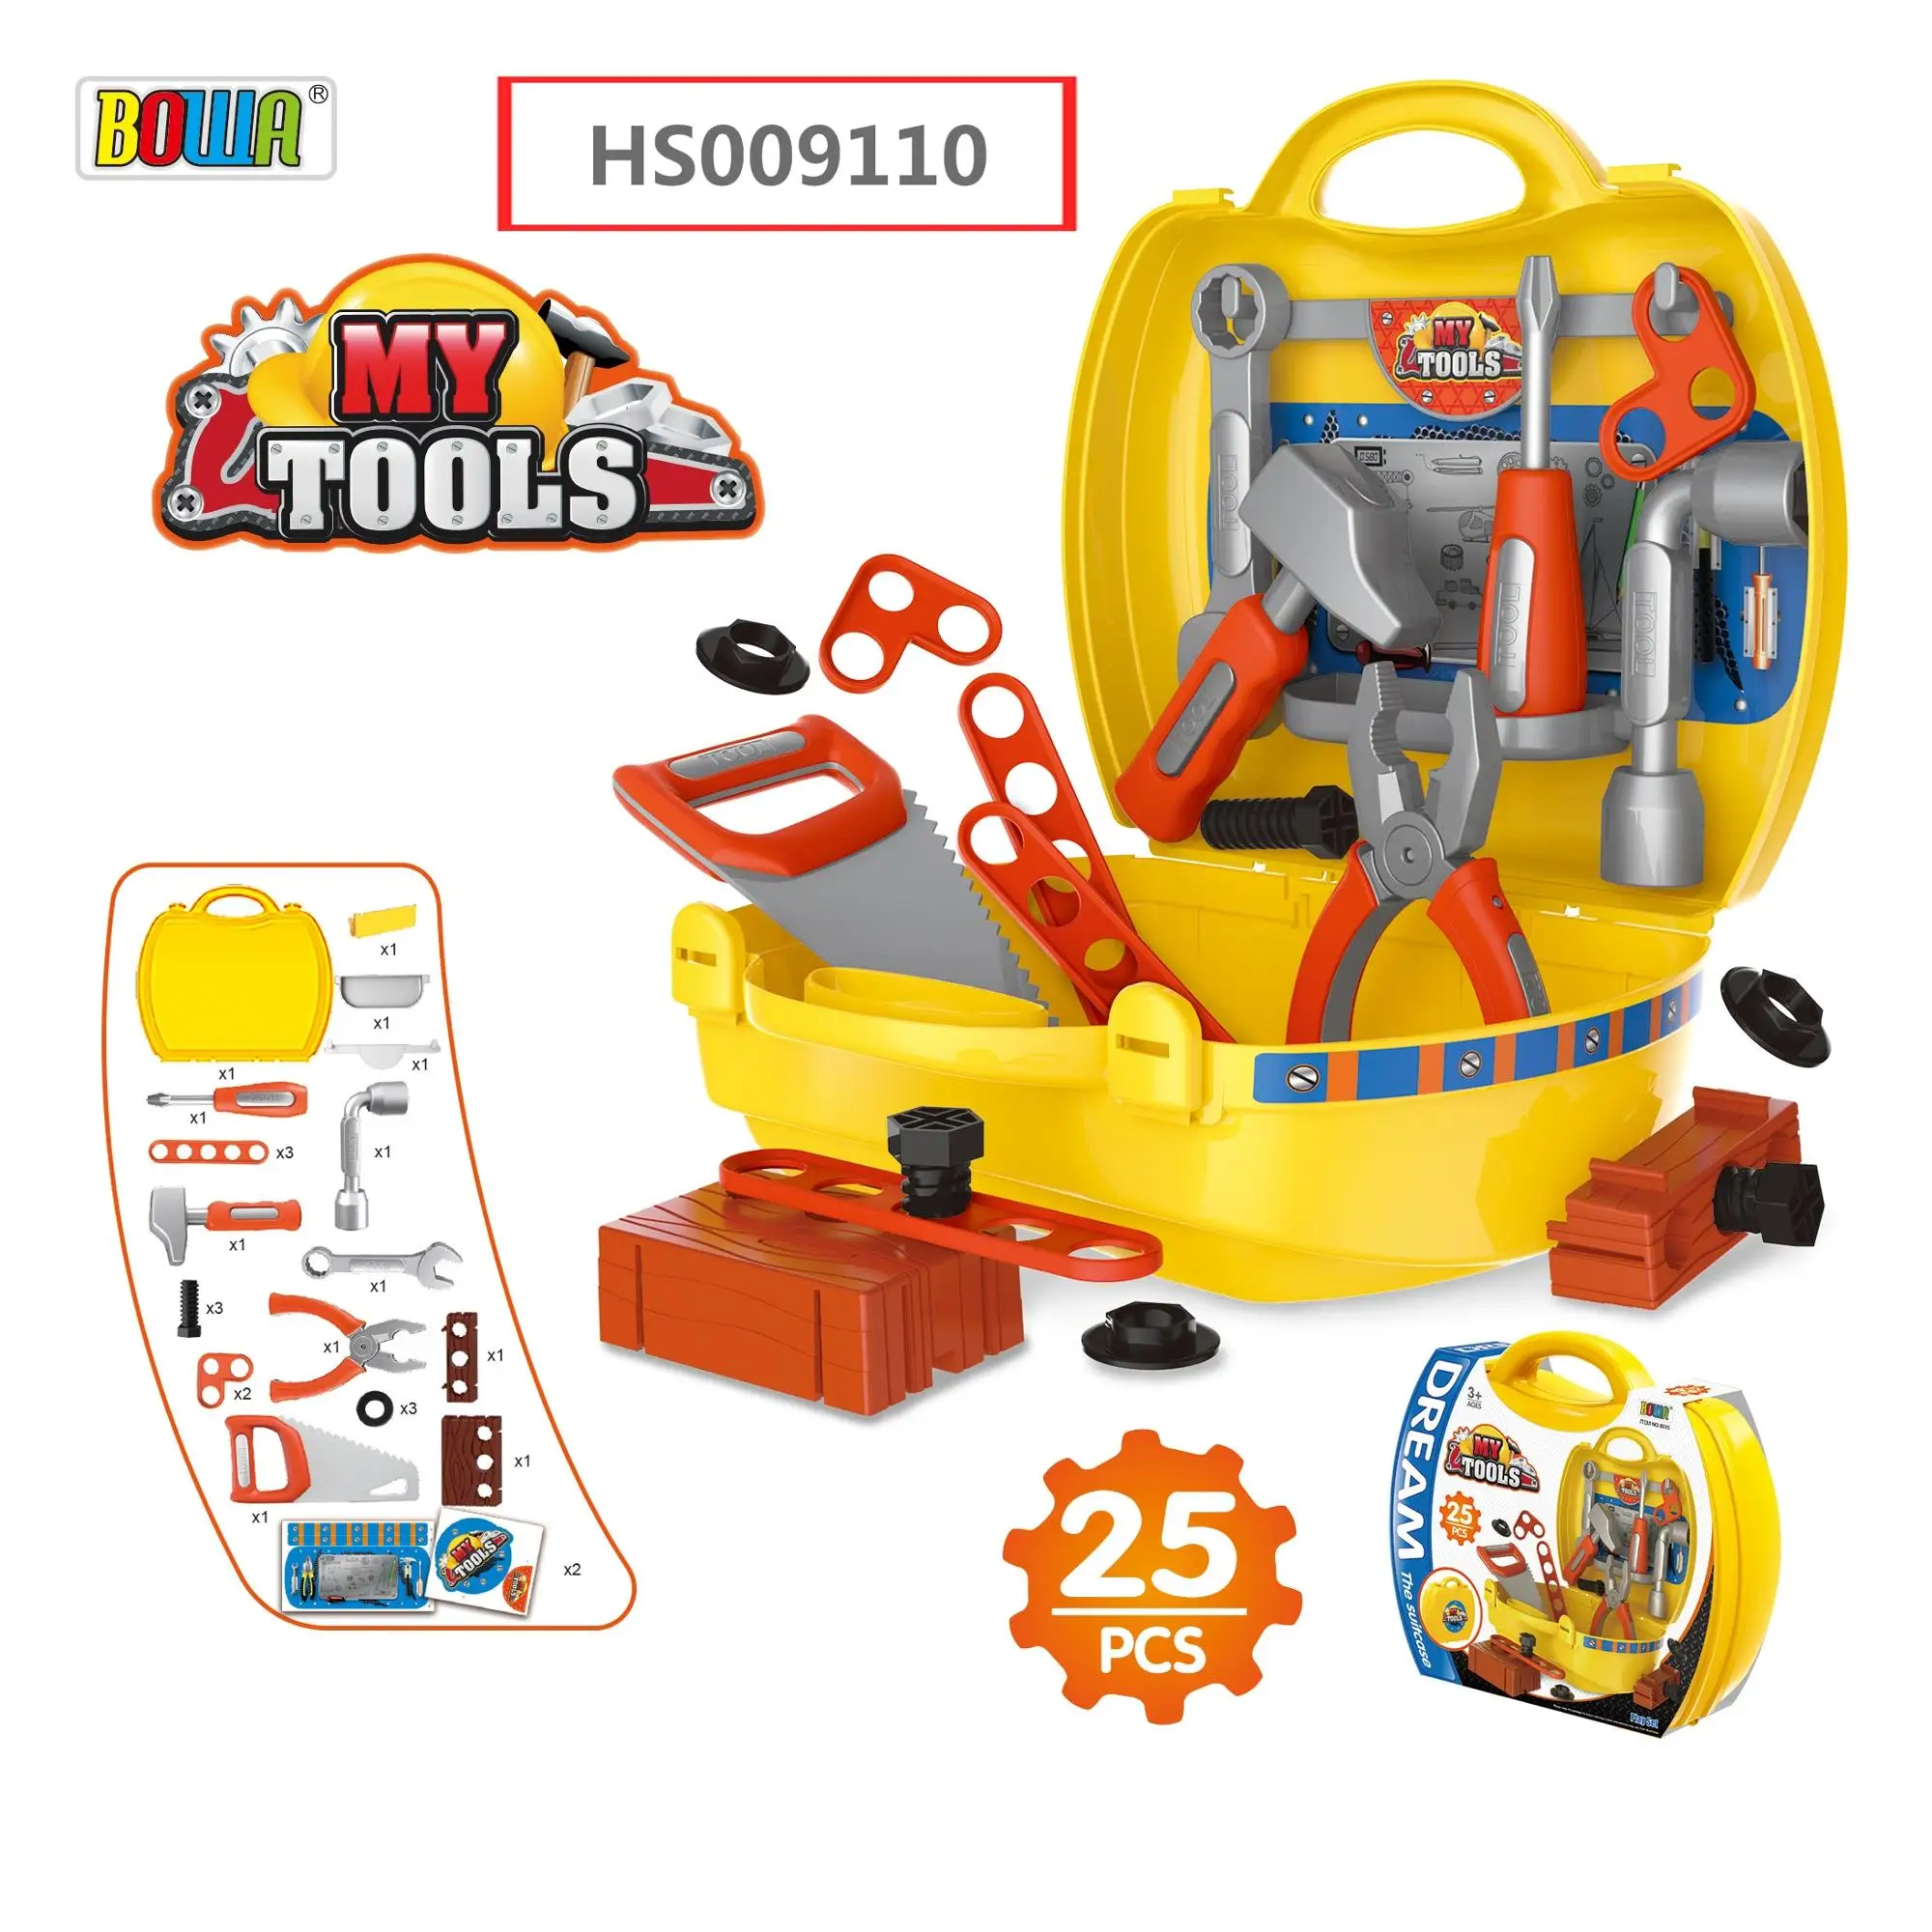 HS009110, Huwsin Toys, Tools Suitcase, Kids play set, Educational toy